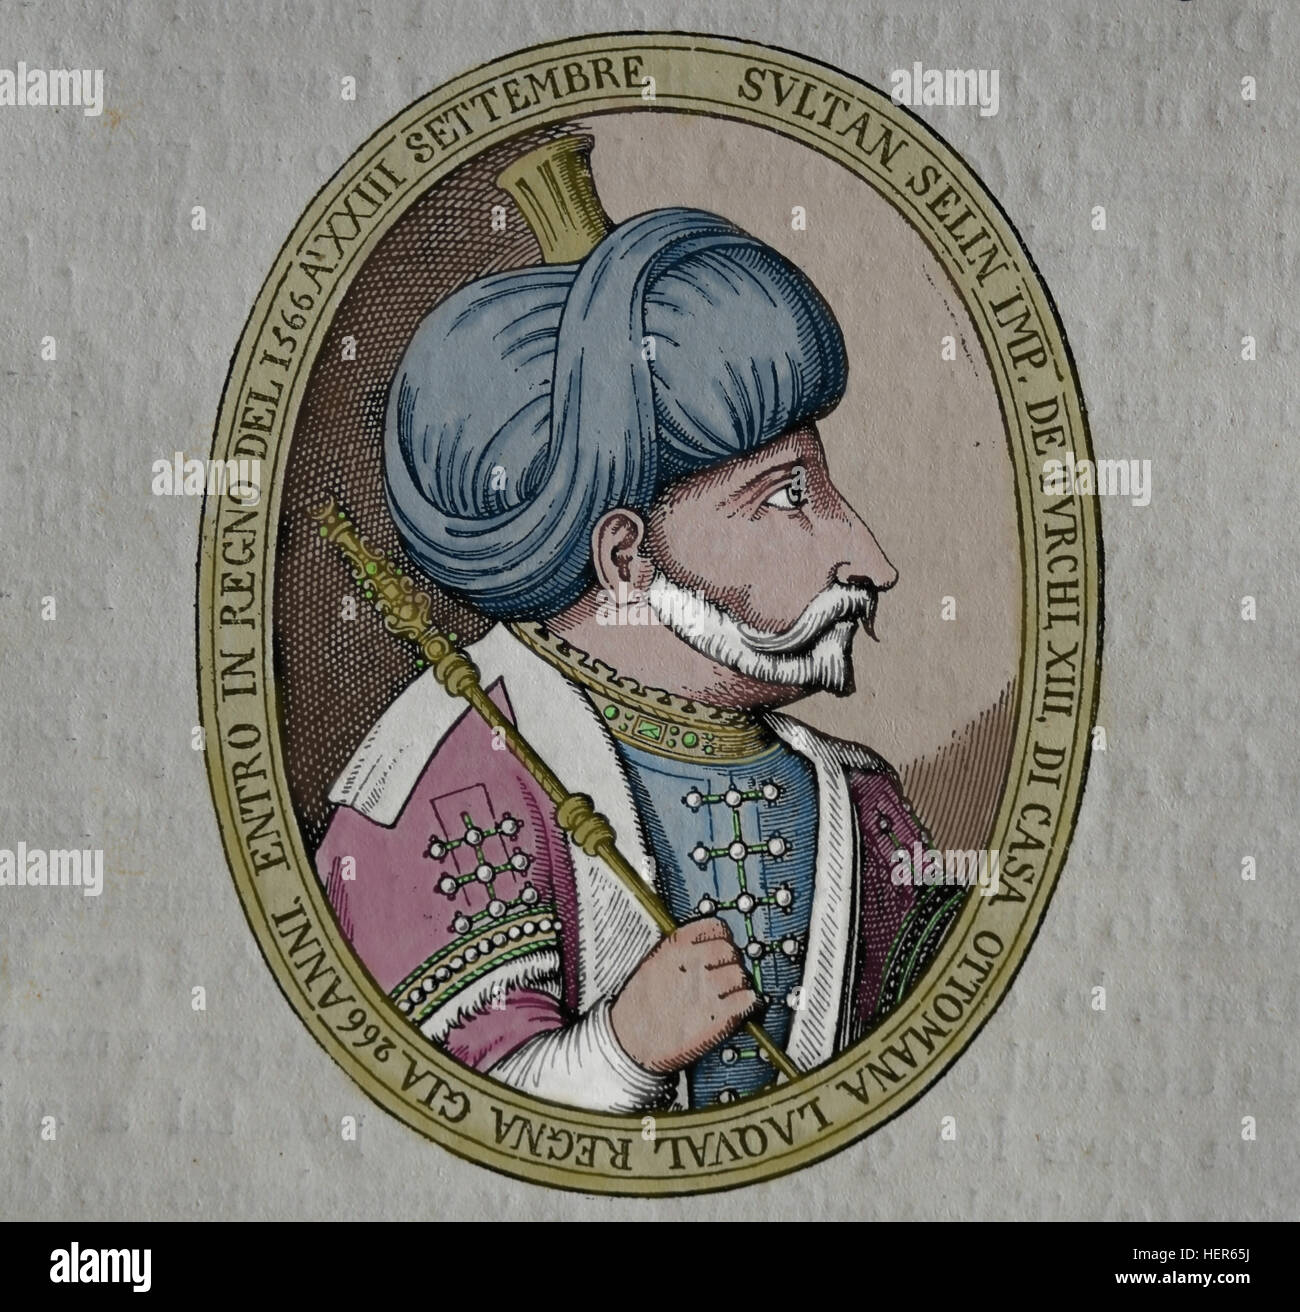 Selim II (1524-1574). 11th OttomanSultan. Portrait. Engraving by History of Philip II, 1884. Color. Stock Photo